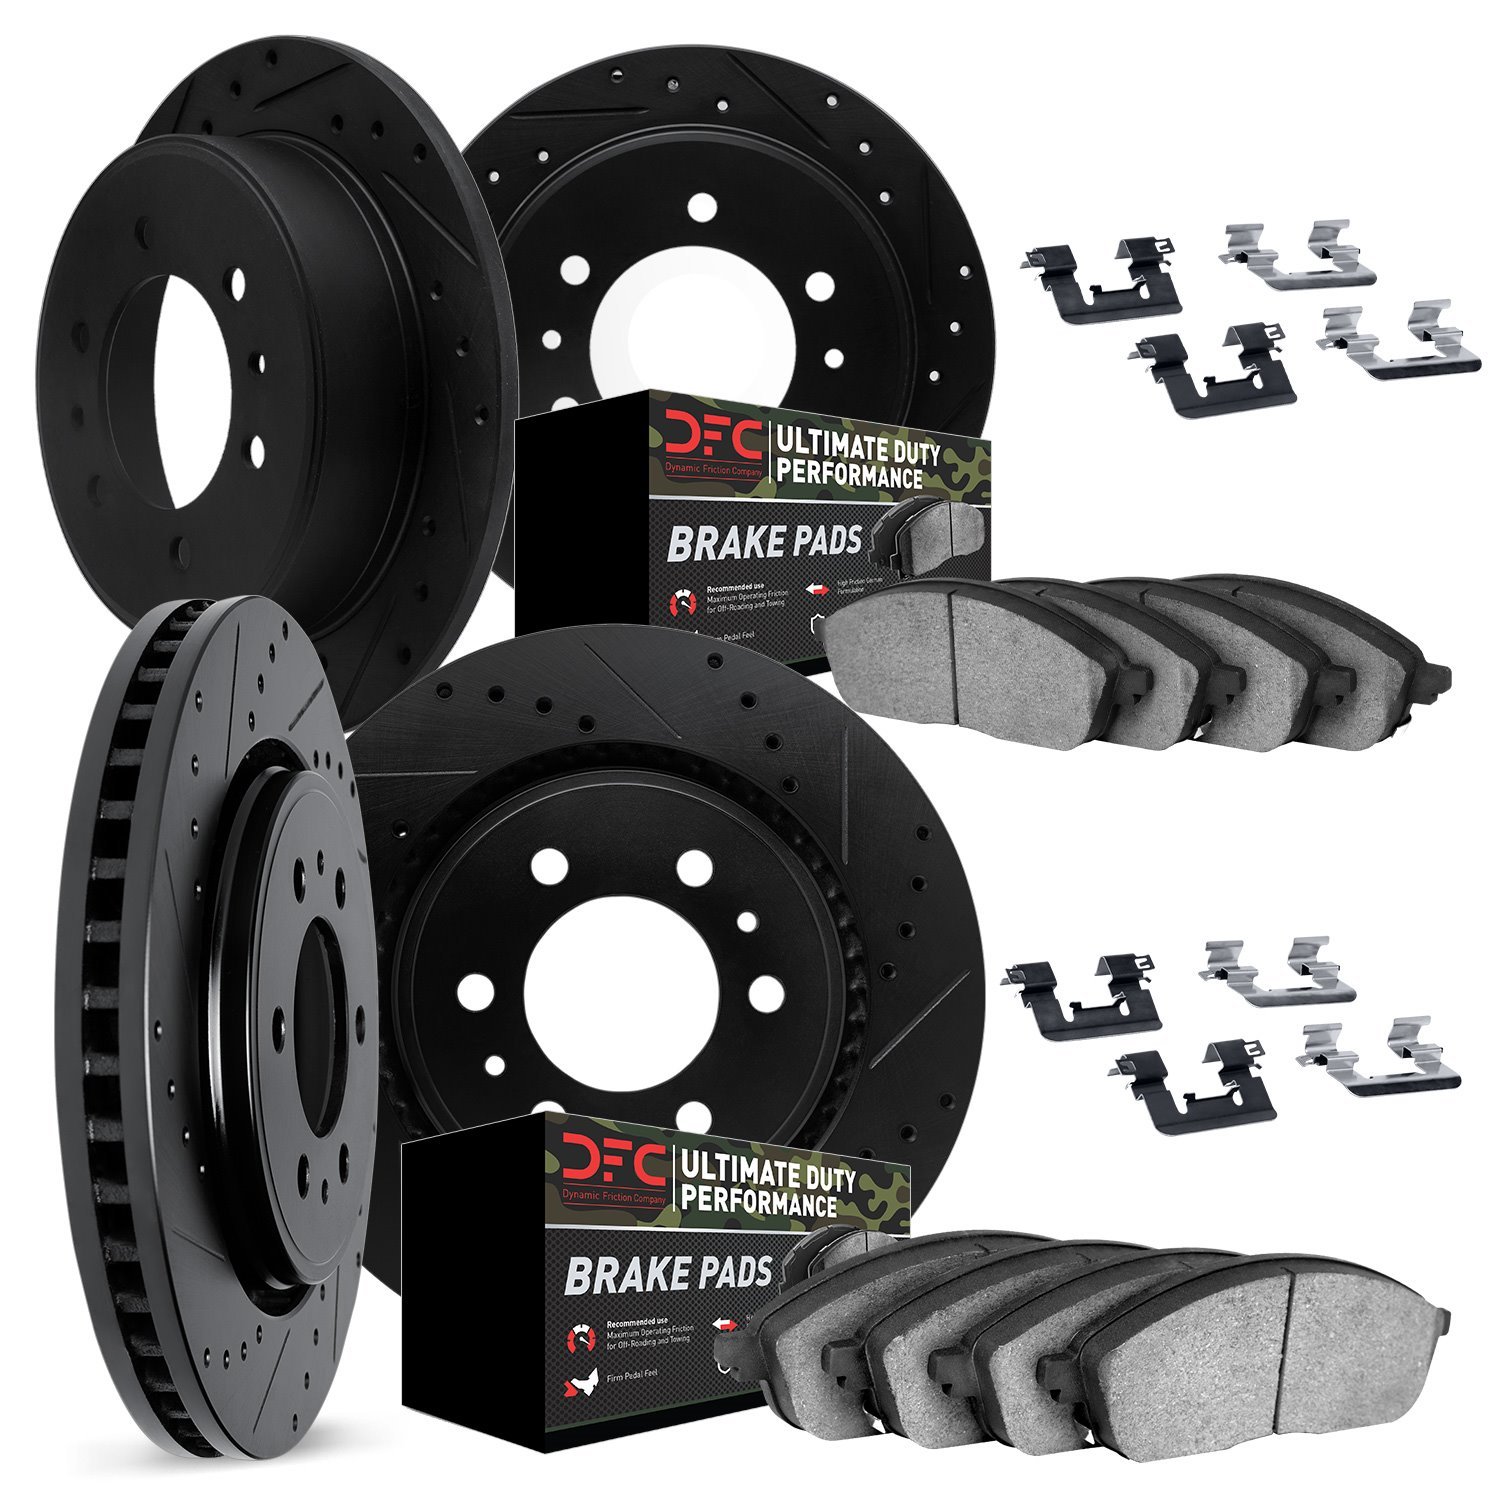 8414-67004 Drilled/Slotted Brake Rotors with Ultimate-Duty Brake Pads Kit & Hardware [Black], 2007-2015 Infiniti/Nissan, Positio